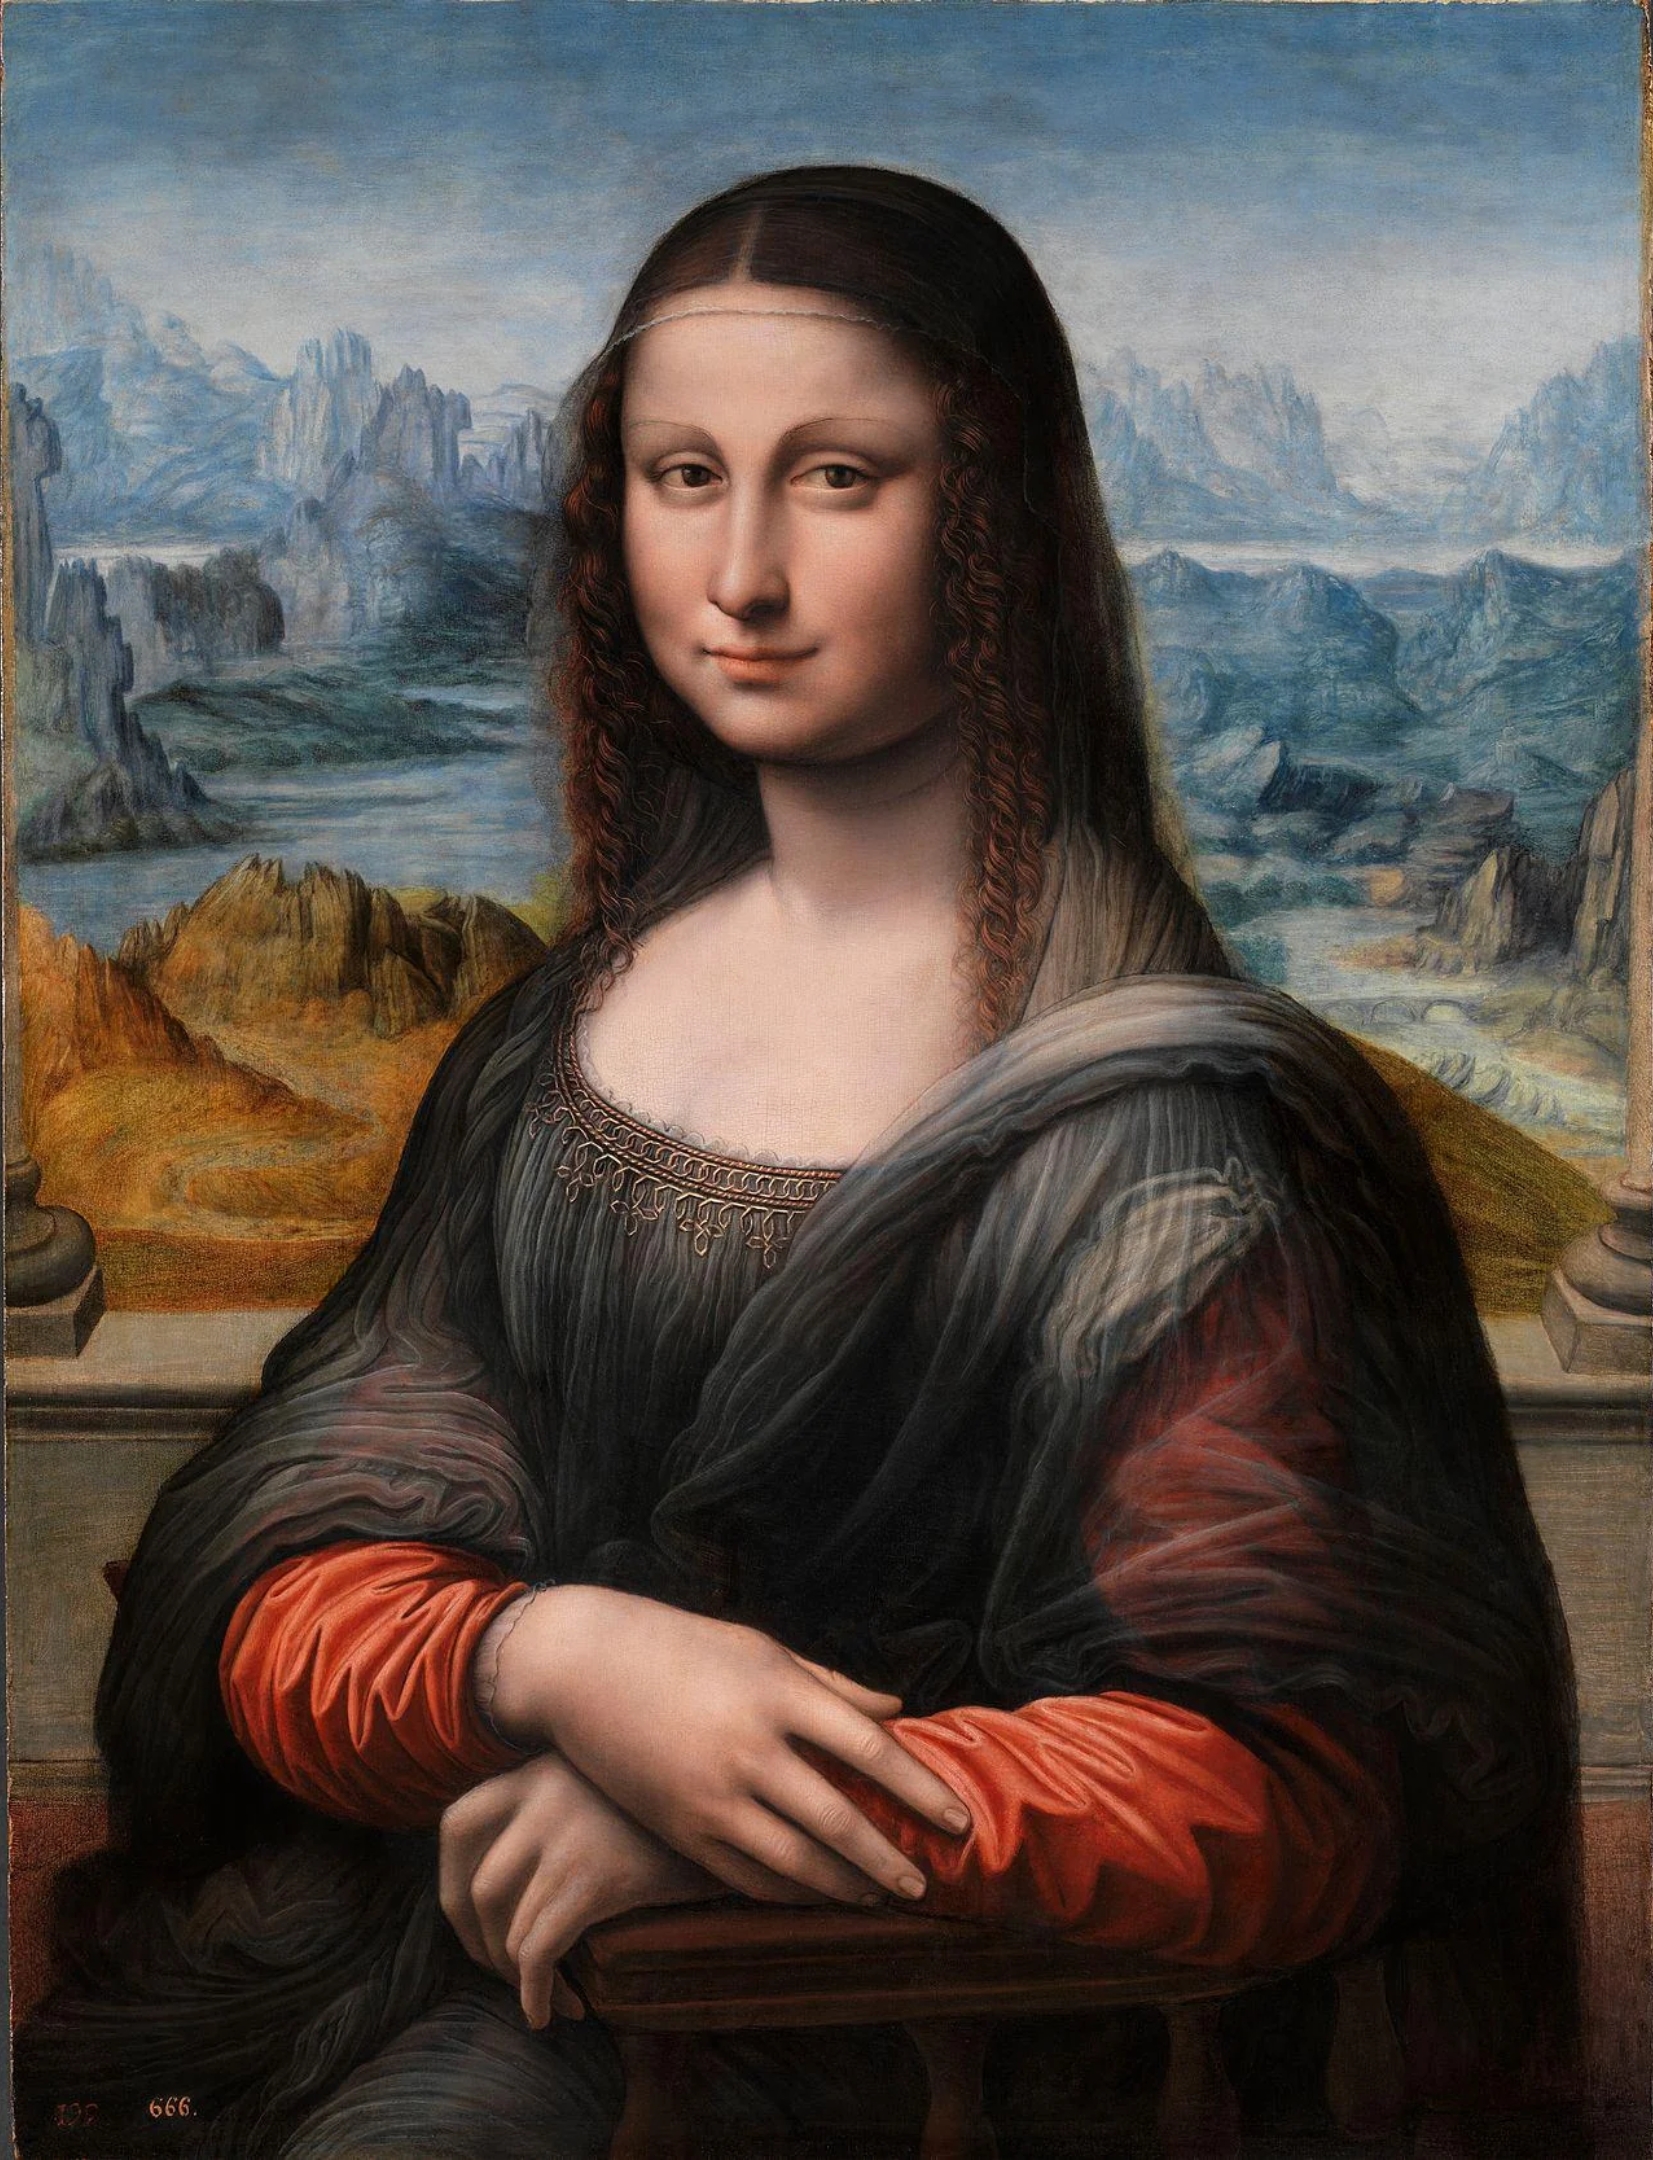 A preserved copy of the Mona Lisa, made by one of da Vinci's students. Discovered in 2012.jpg